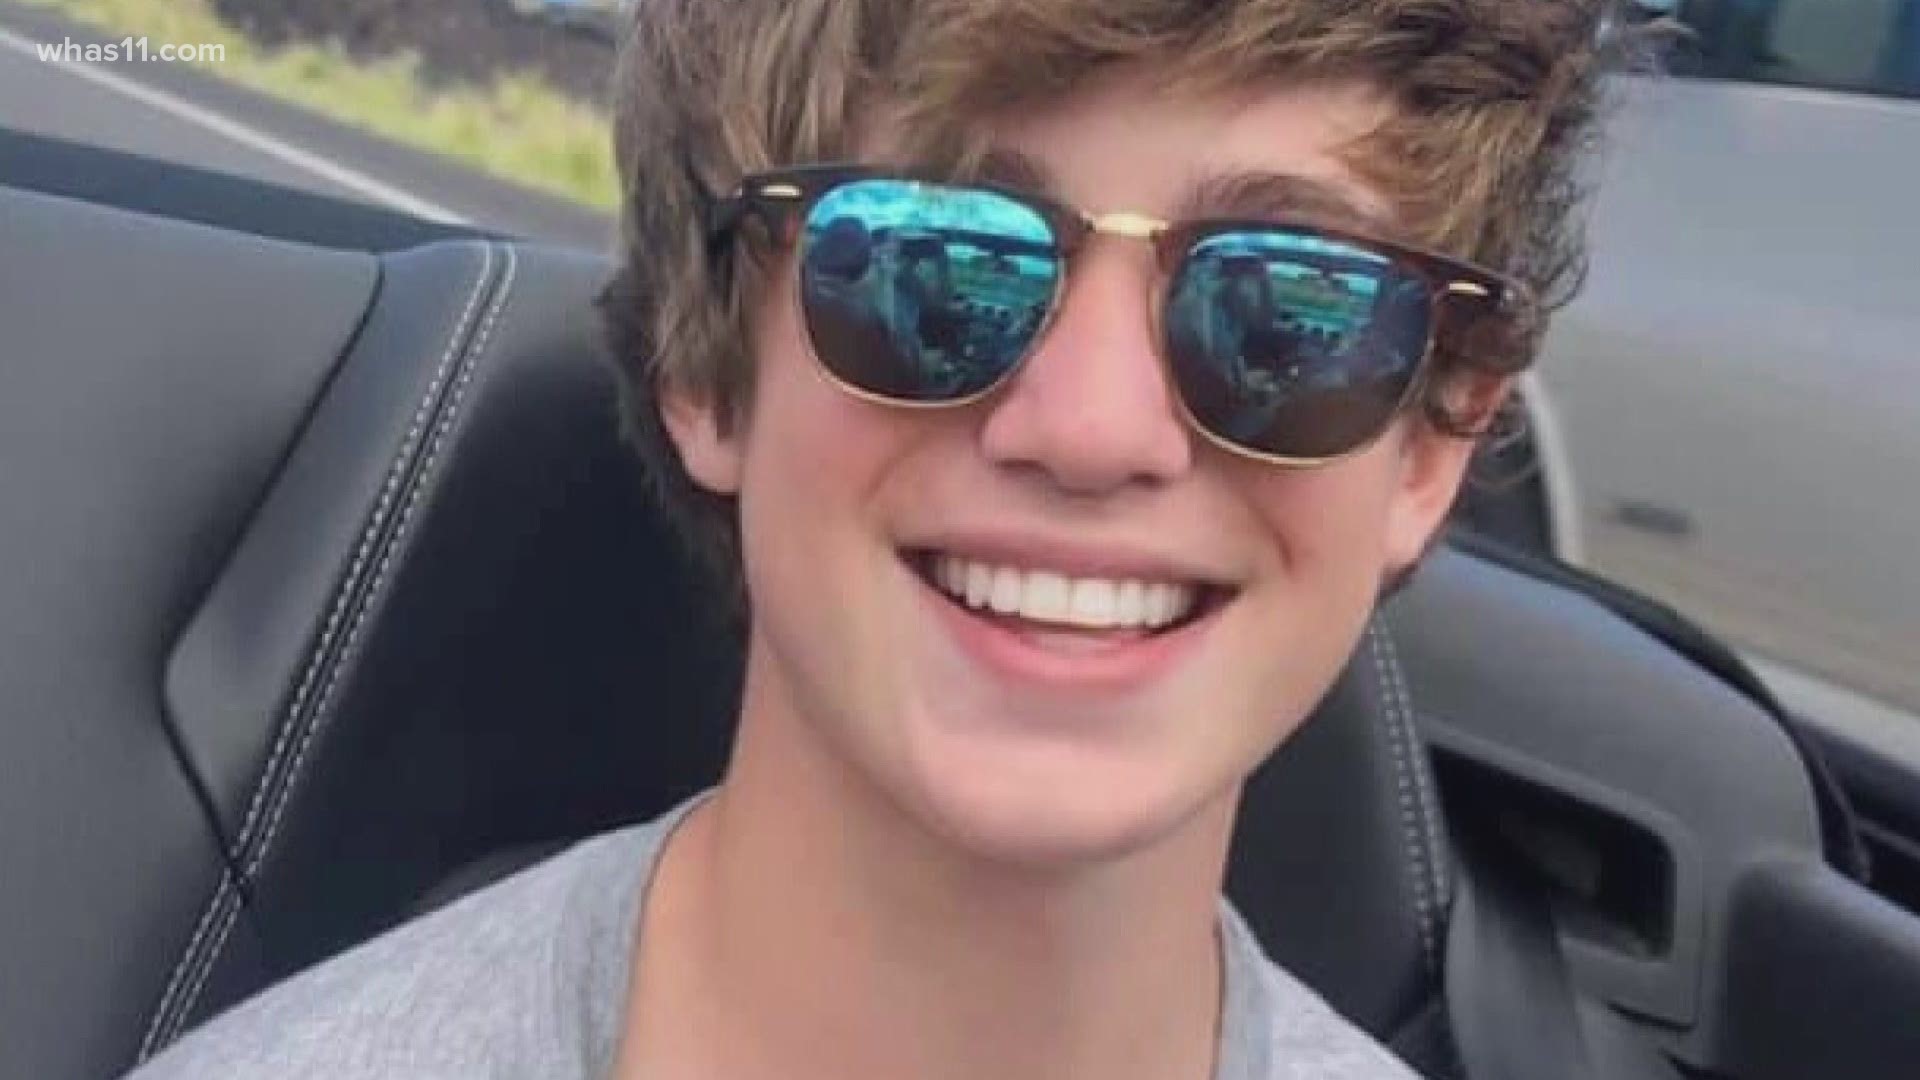 Jacob Stover's family said they have been informed that remains discovered near the Newburgh Dam belong to the 16-year-old who went missing while kayaking Jan. 10.